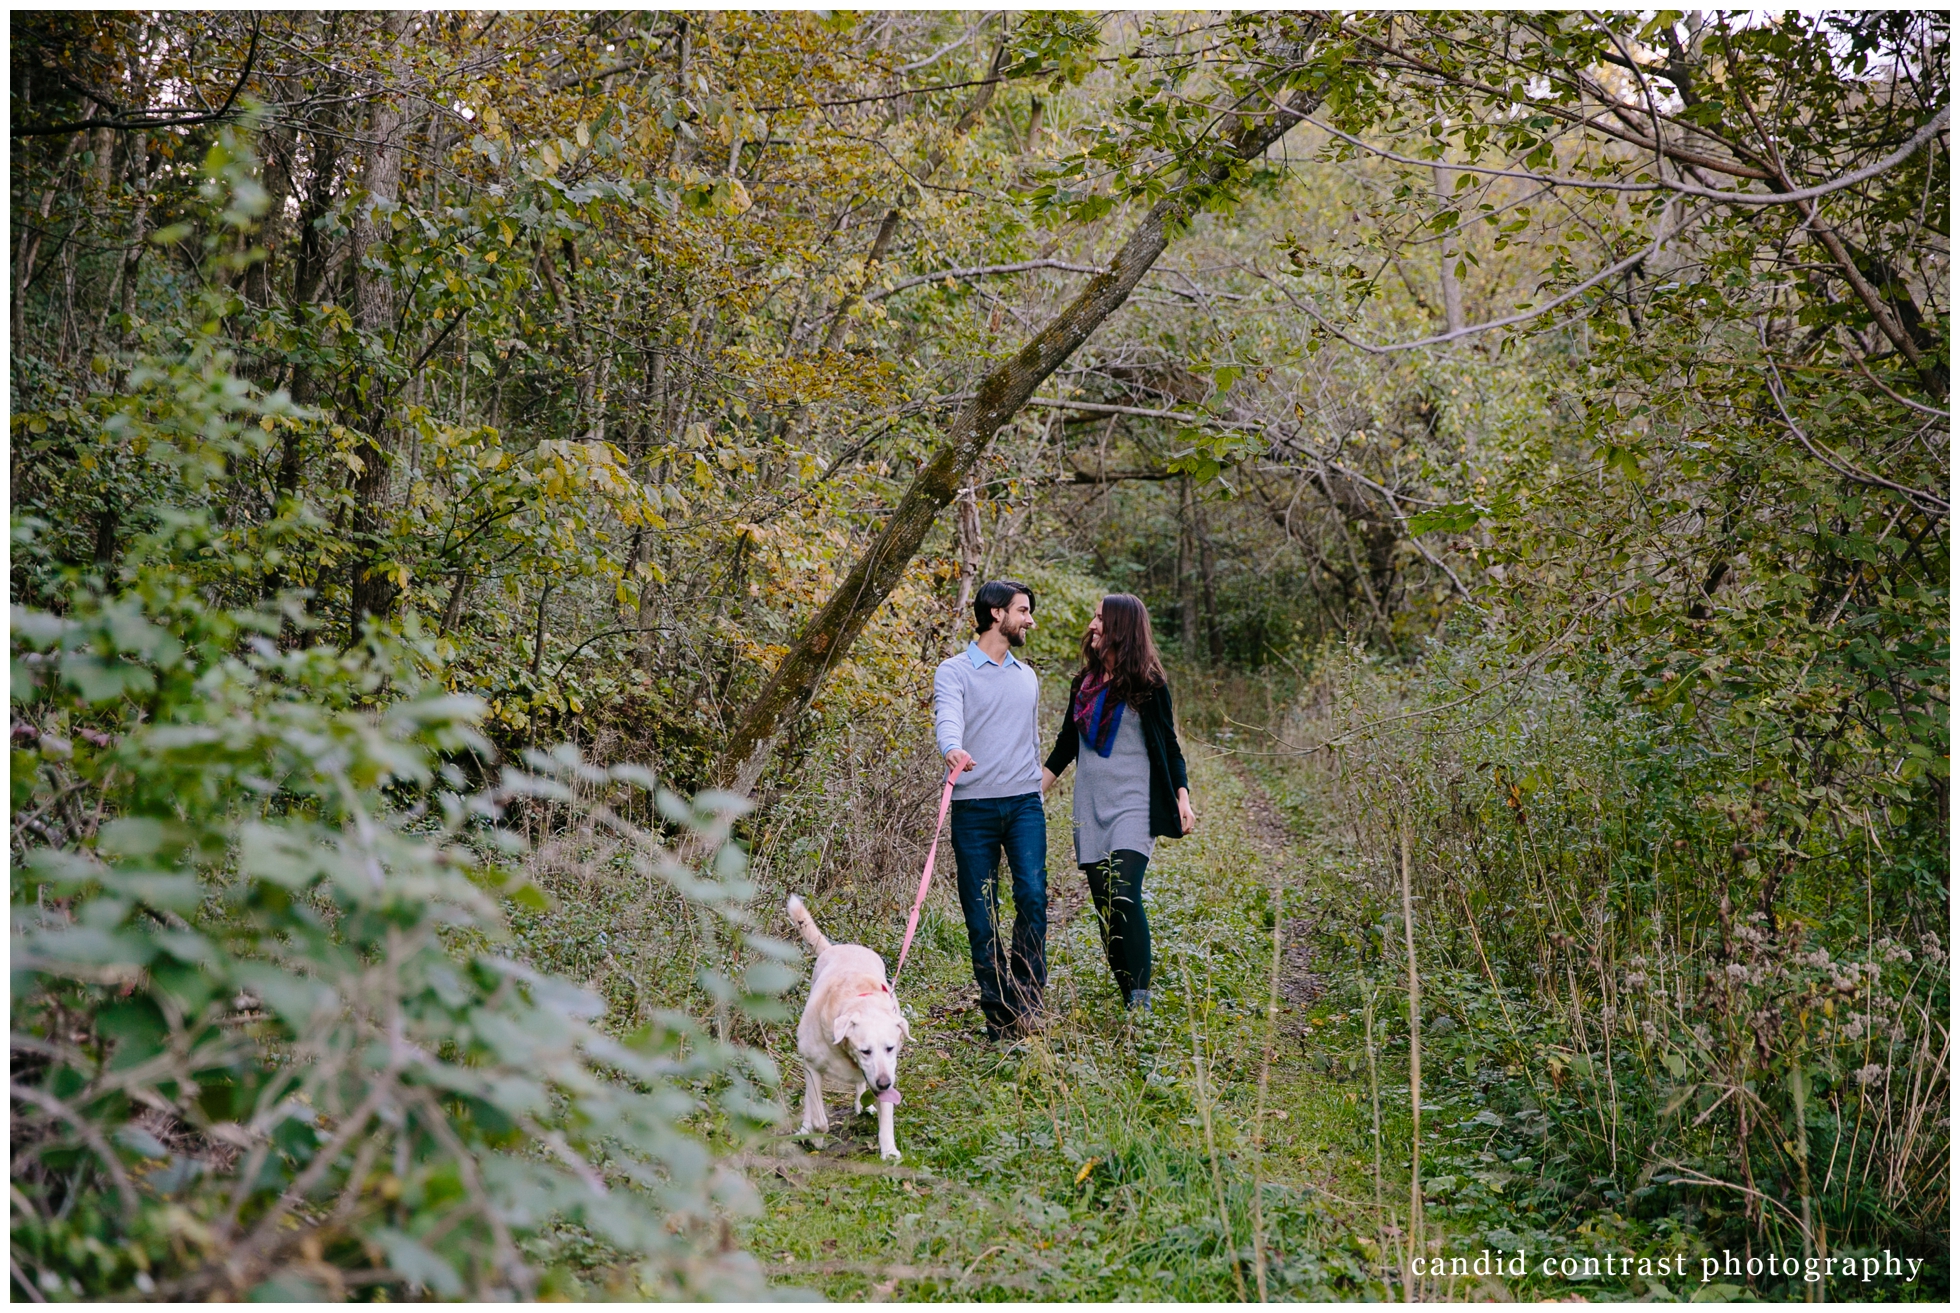 outdoor dubuque iowa engagement photos with dog, iowa wedding photographer candid contrast photography 